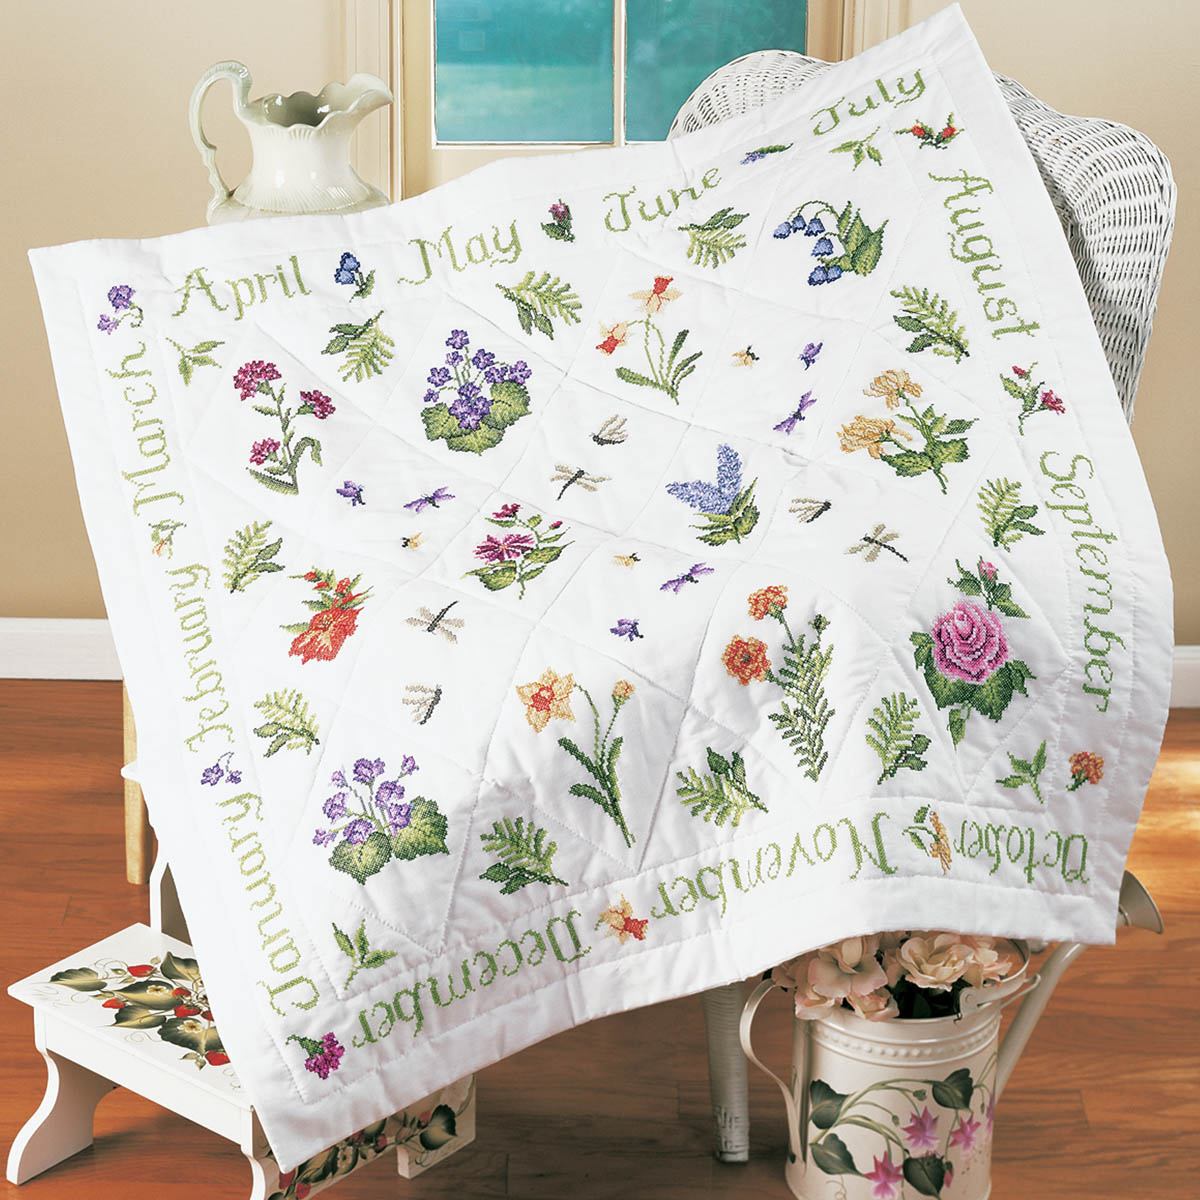 Bucilla ® Special Edition - Stamped Cross Stitch - Lap Quilts - Donna Dewberry - Year of Flowers - 4